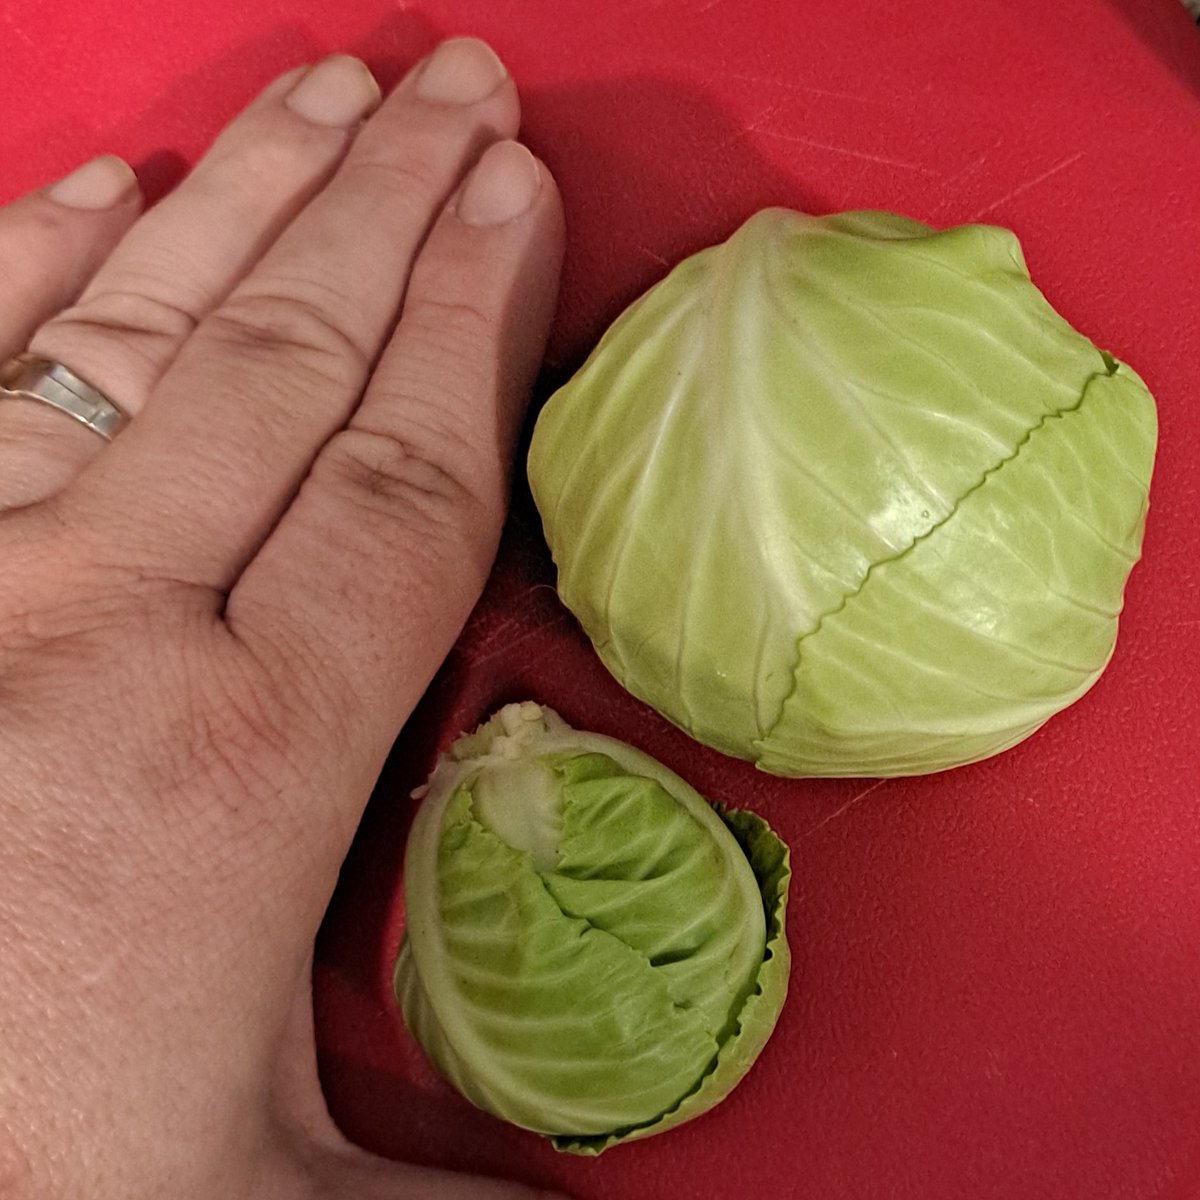 Tonight, I #harvested my baby #cabbages, because there just wasn't going to be enough time for them to size up, and I need to refurb the bed they were in. Still, they're dinner tonight, and still tasty. #RaisedBedGarden #HomeGarden #HomeGrown #SquareFootGarden #NoDigGarden